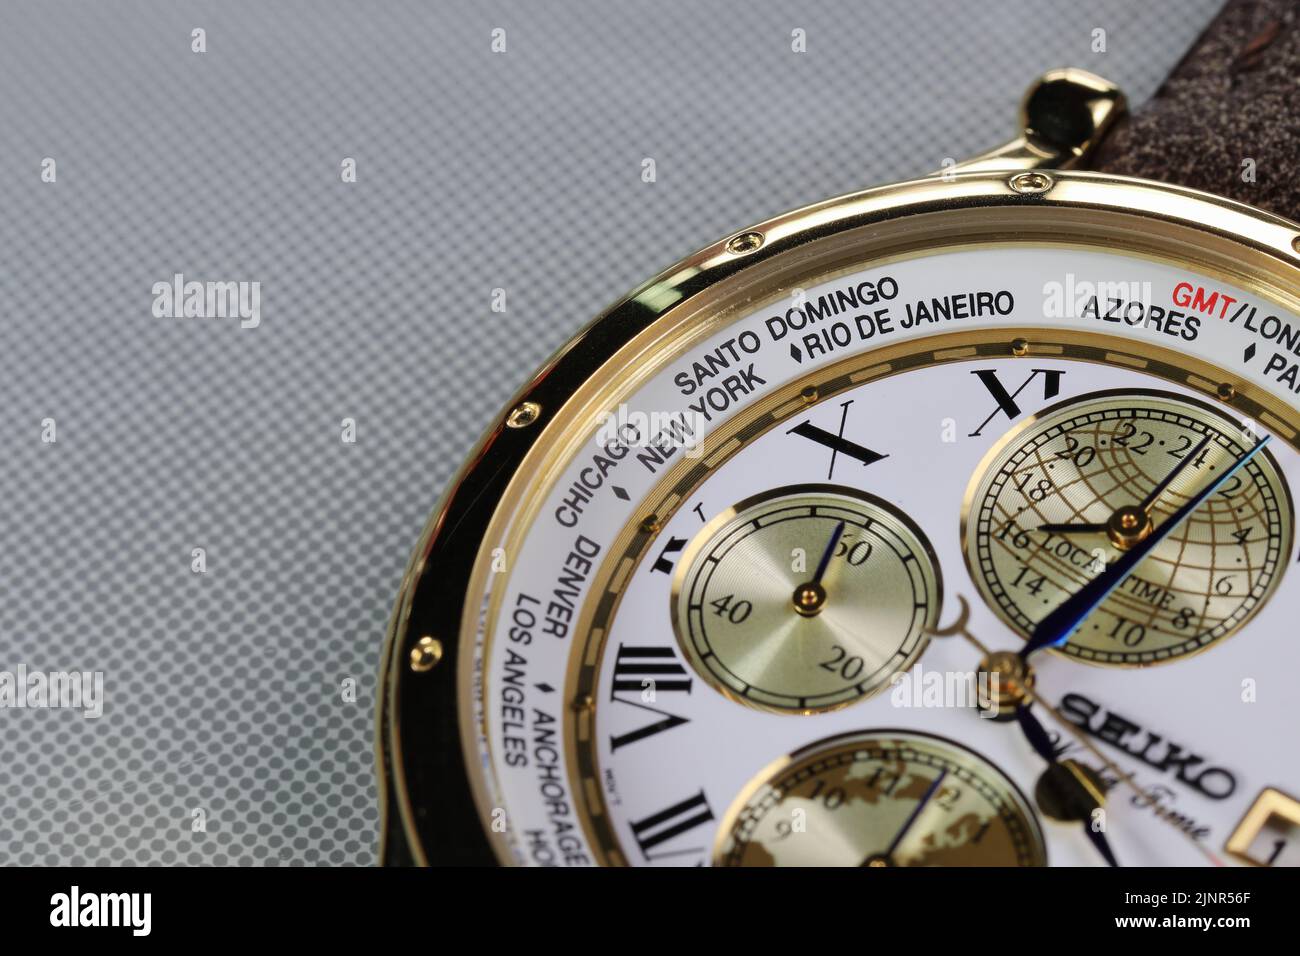 Close up on Time zone cities name on luxury world time watch bezel. Stock Photo